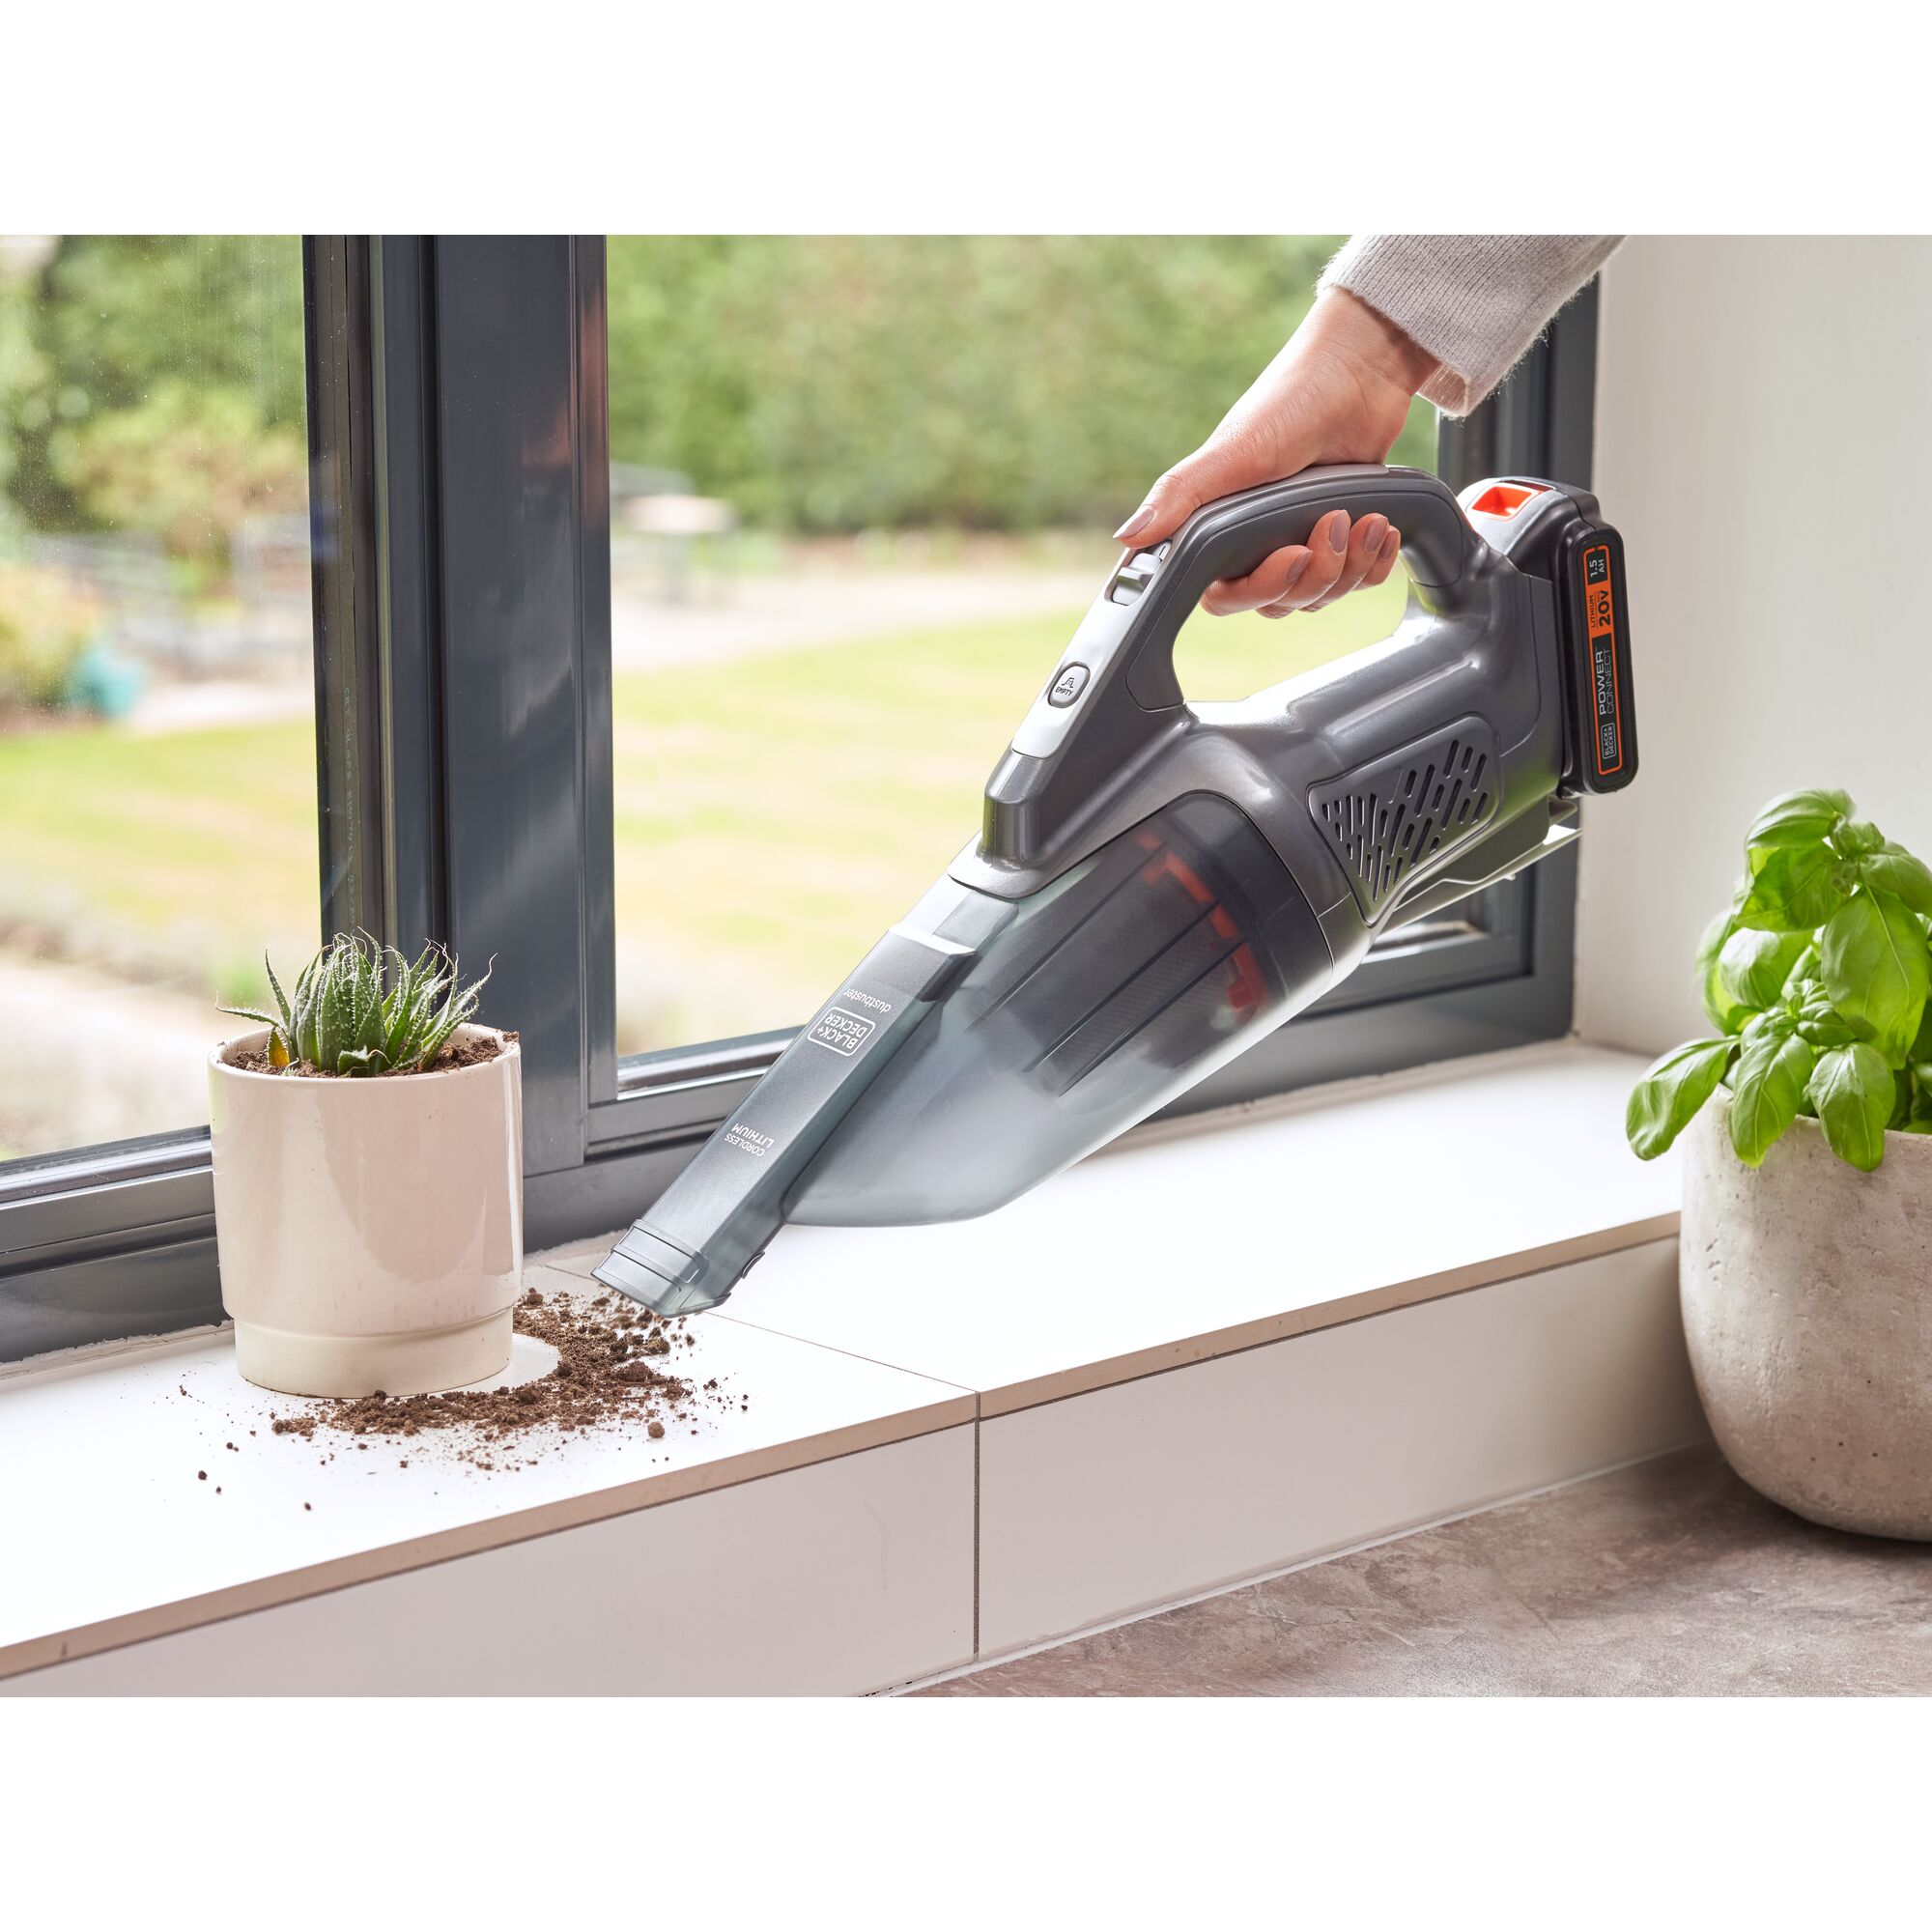 Person using Black and Decker Dustbuster 20V MAX* POWERCONNECT Cordless Handheld Vacuum to clean up dirt from a window sill